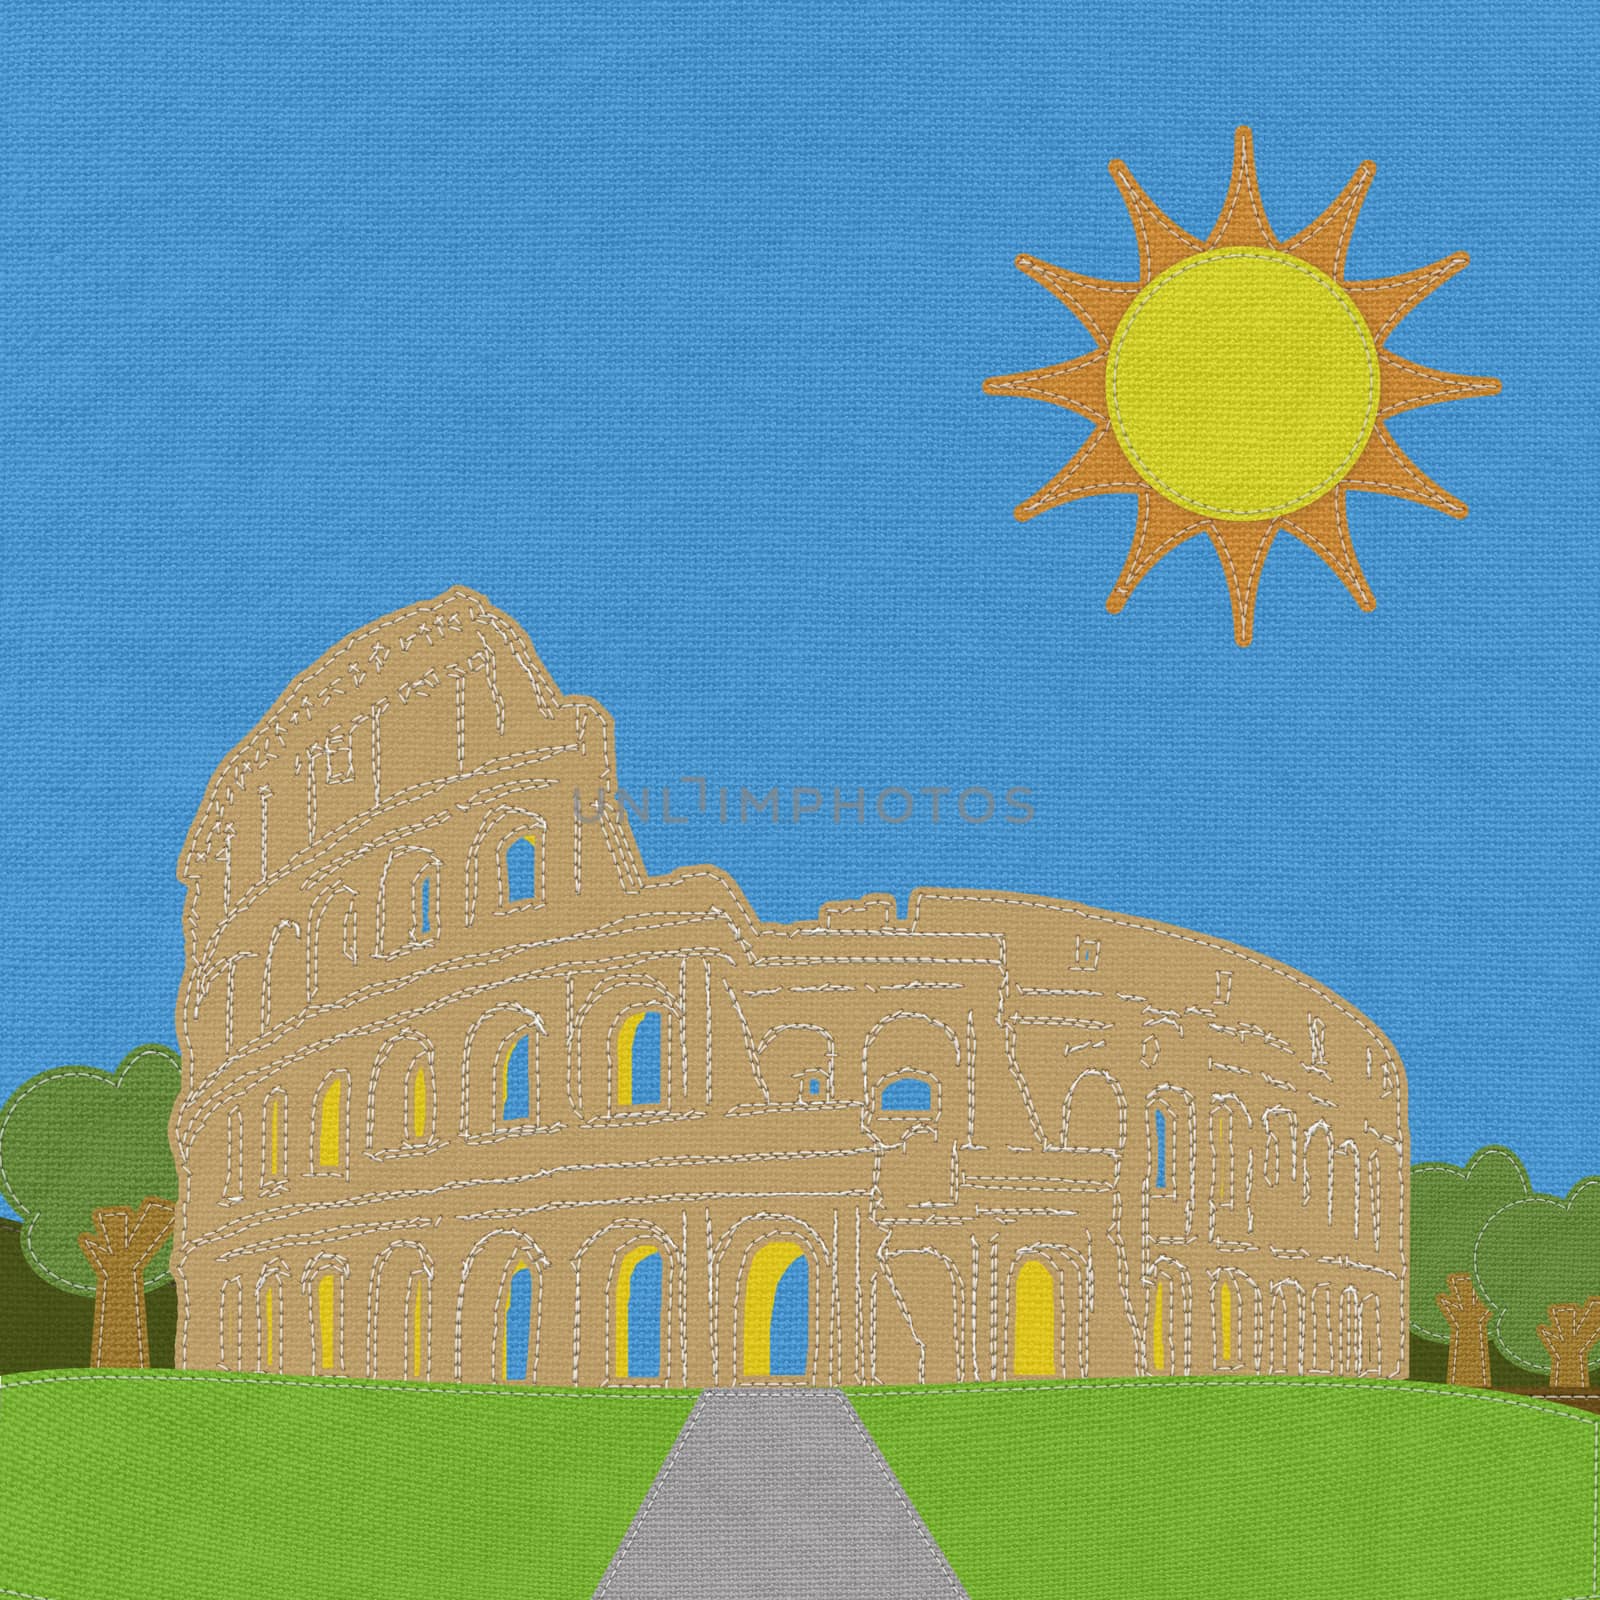 Colosseum in rome with stitch style on fabric background by basketman23